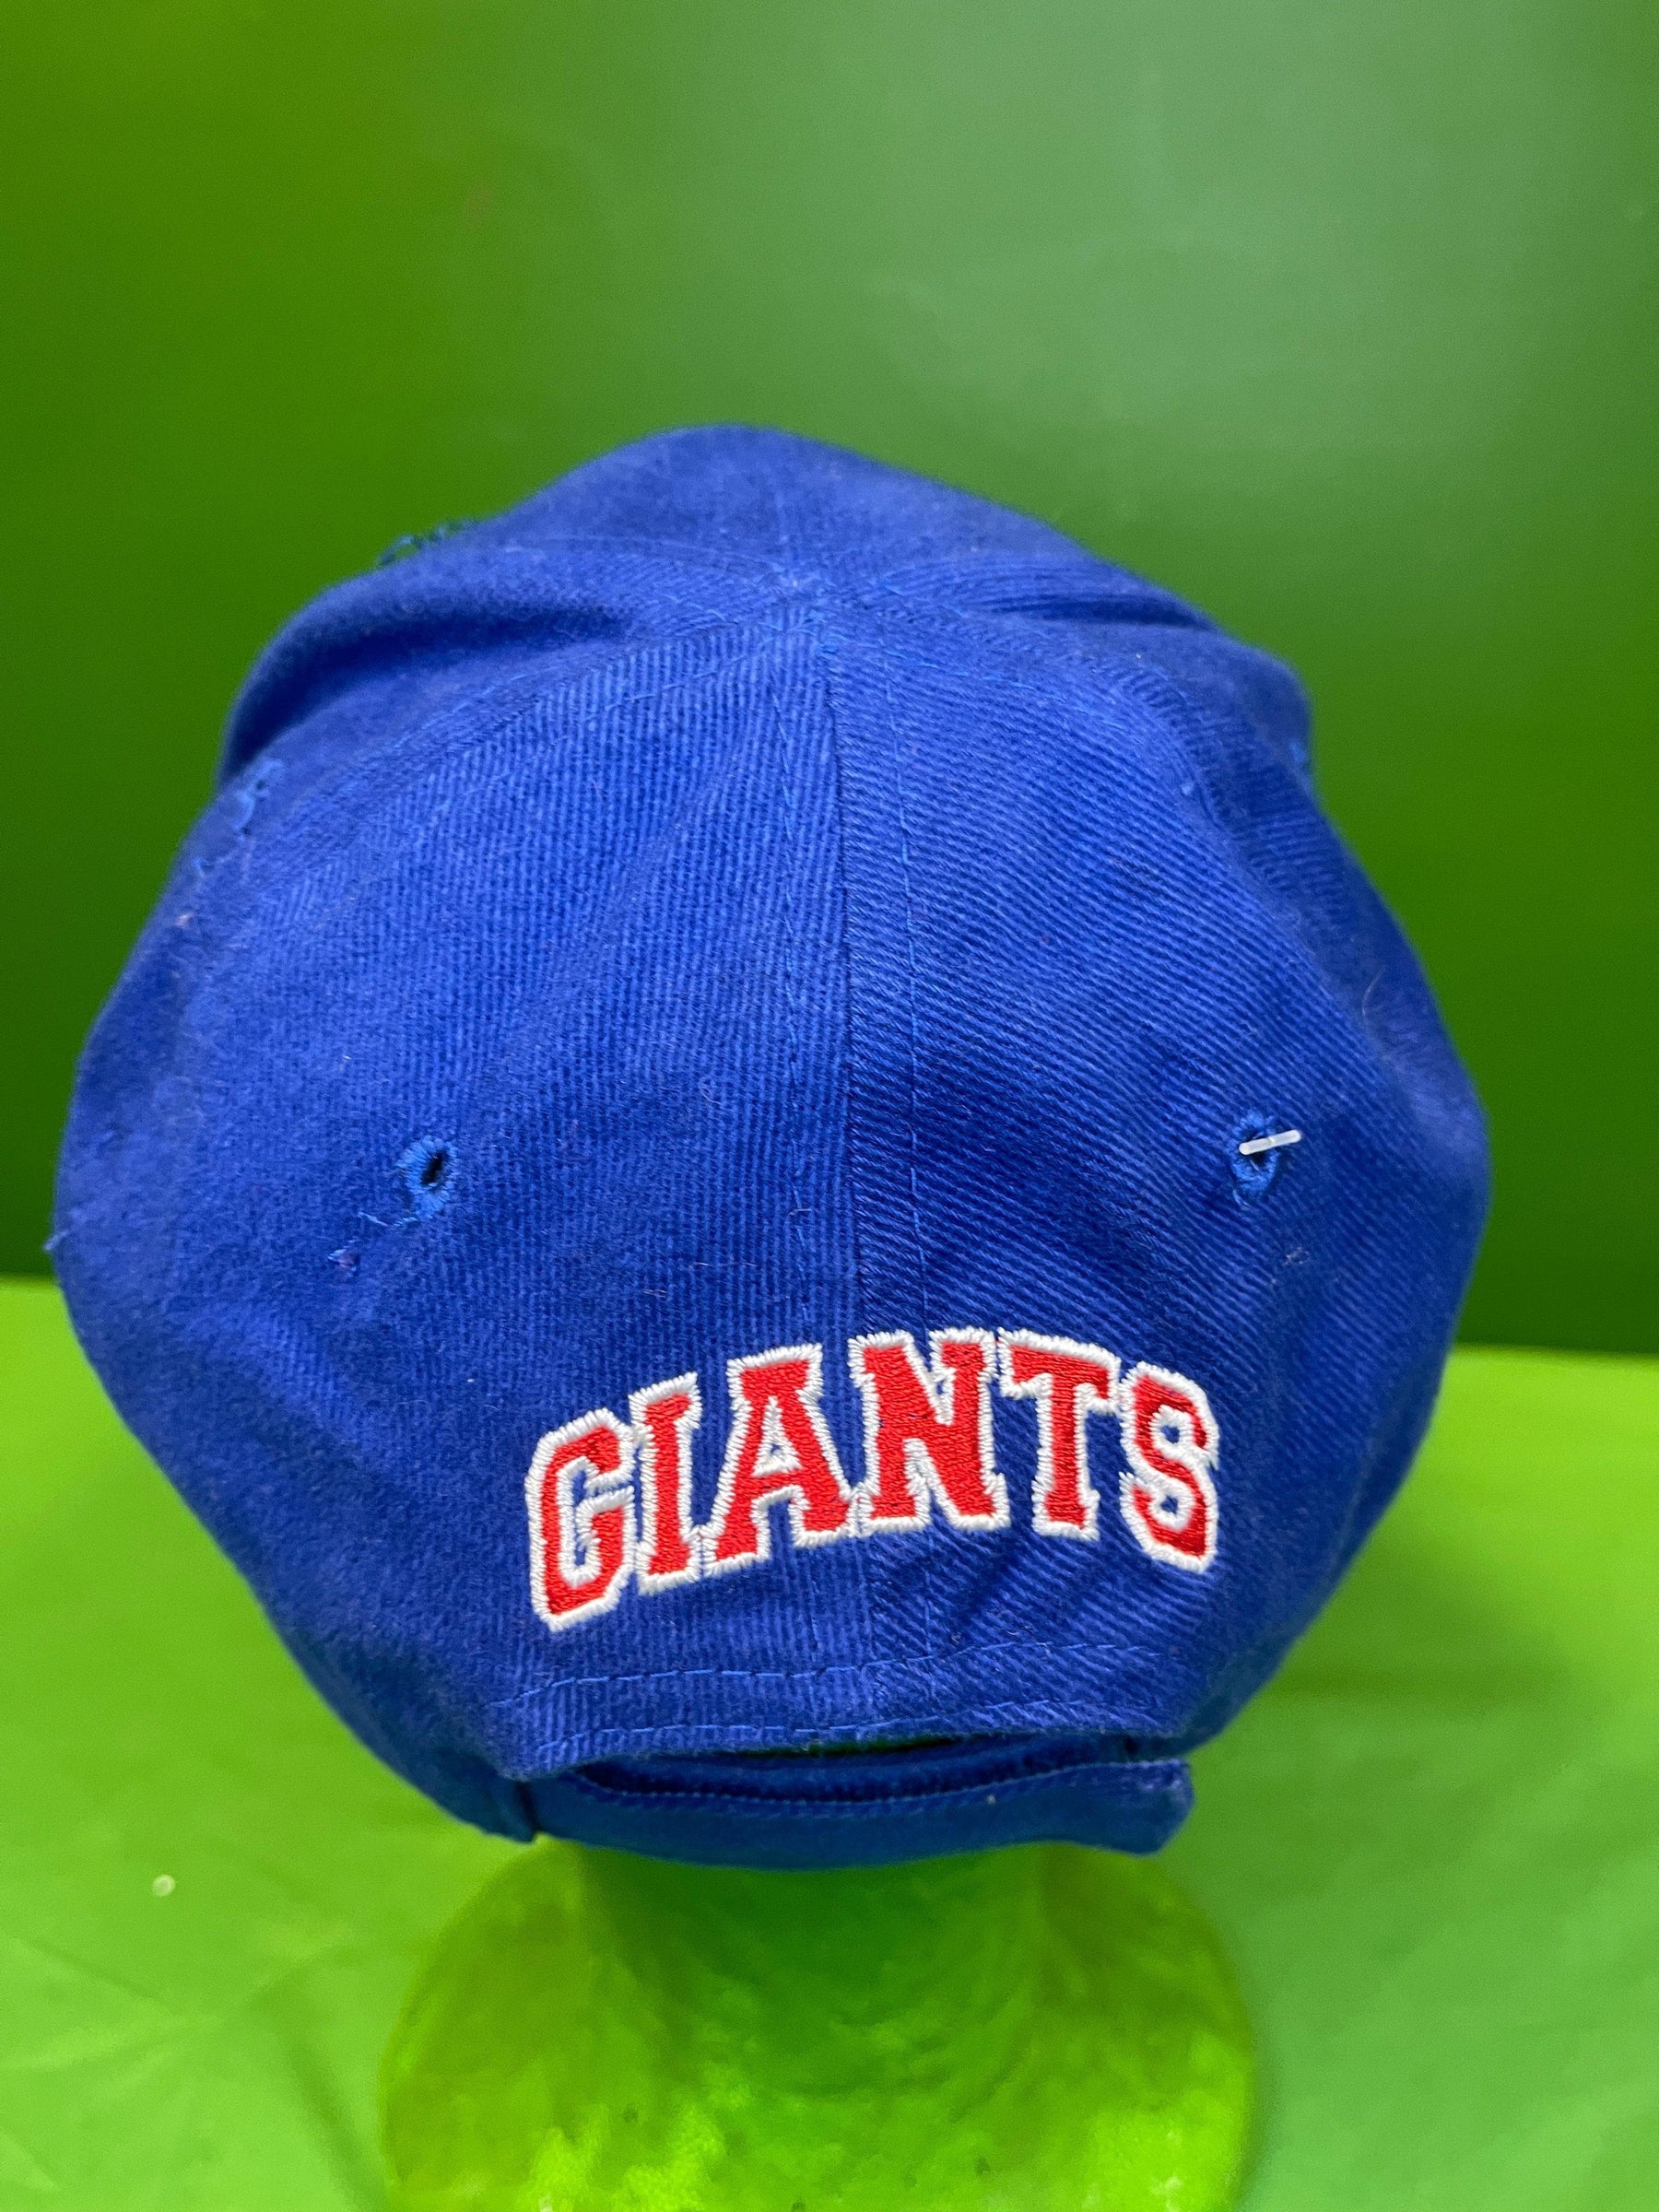 NFL New York Giants Blue Cotton Cap/Hat Youth OSFM Appx. 8-20